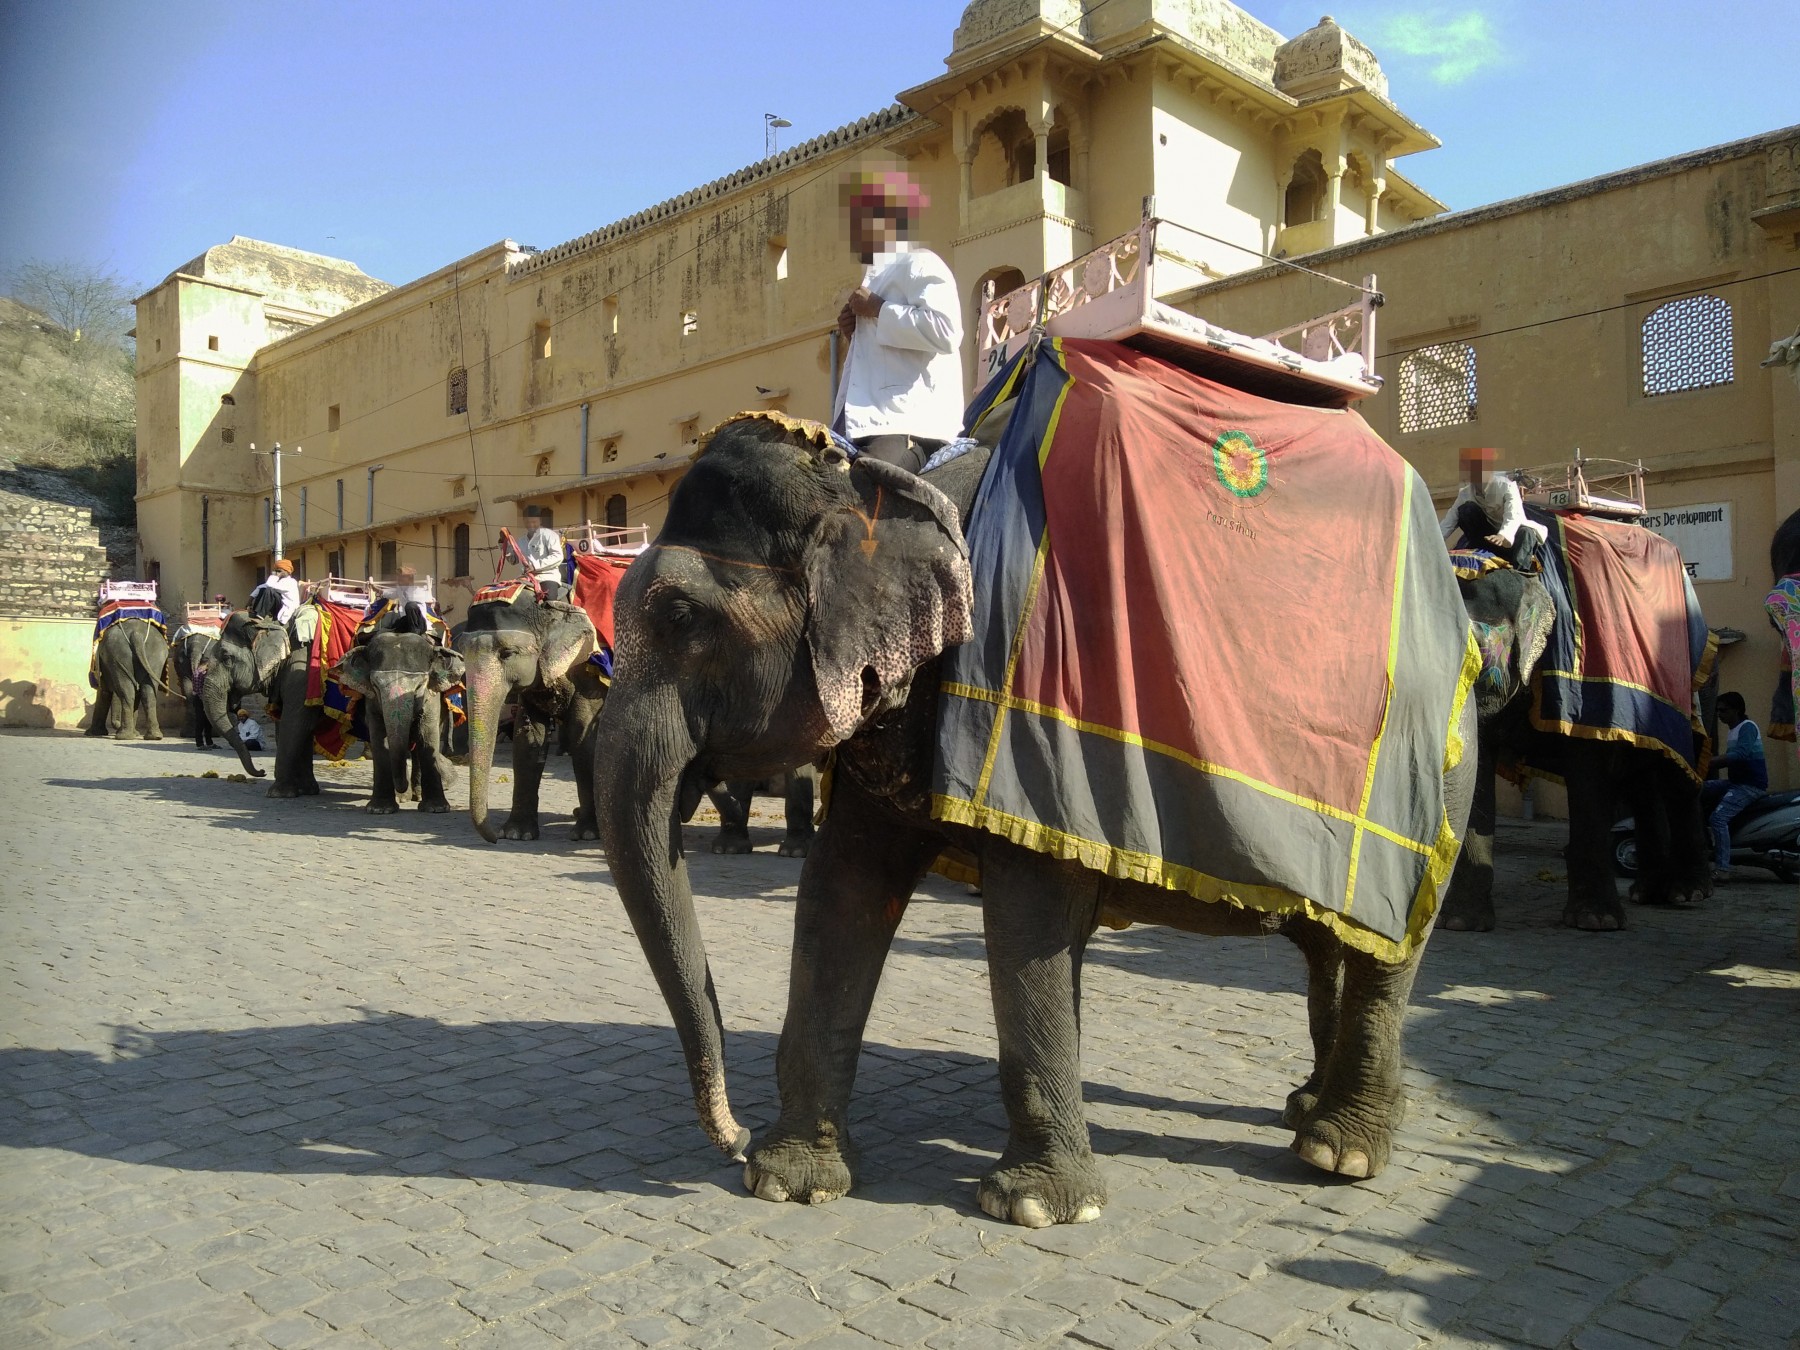 Elephants forced to give rides to tourists at Amer Fort in India.